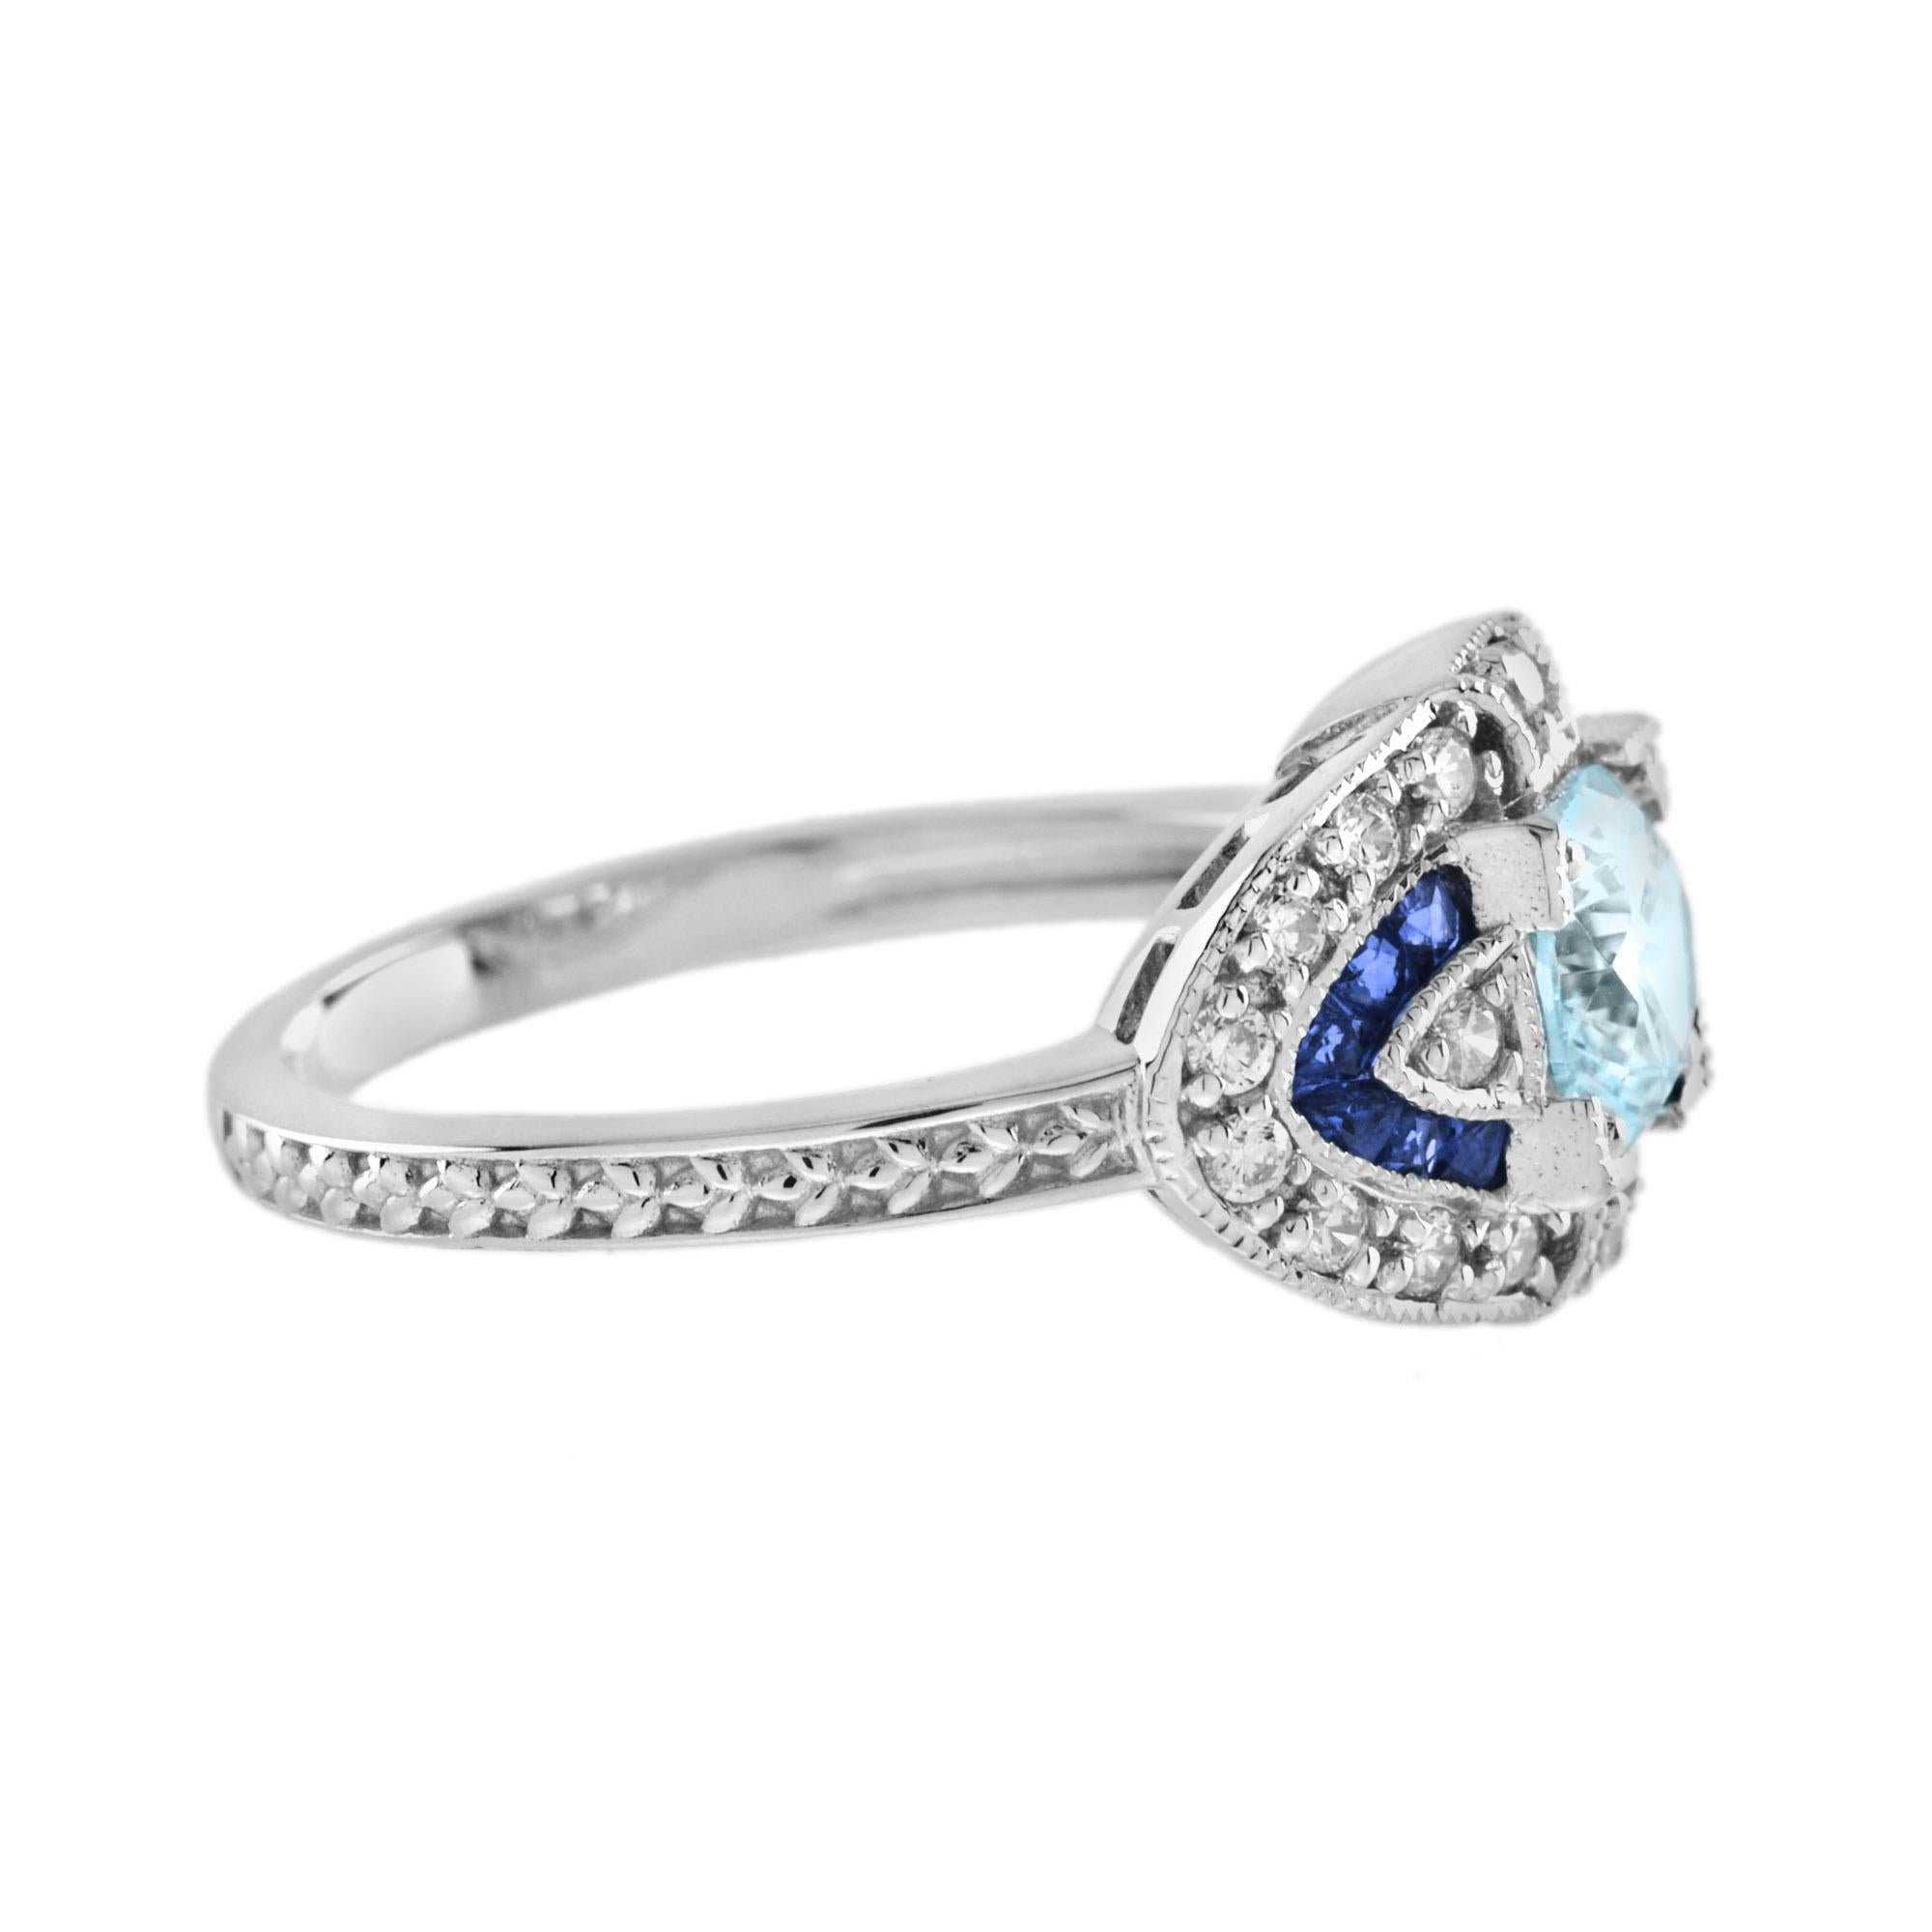 Round Cut Aquamarine Sapphire Diamond Art Deco Style Engagement Ring in 18k White Gold For Sale